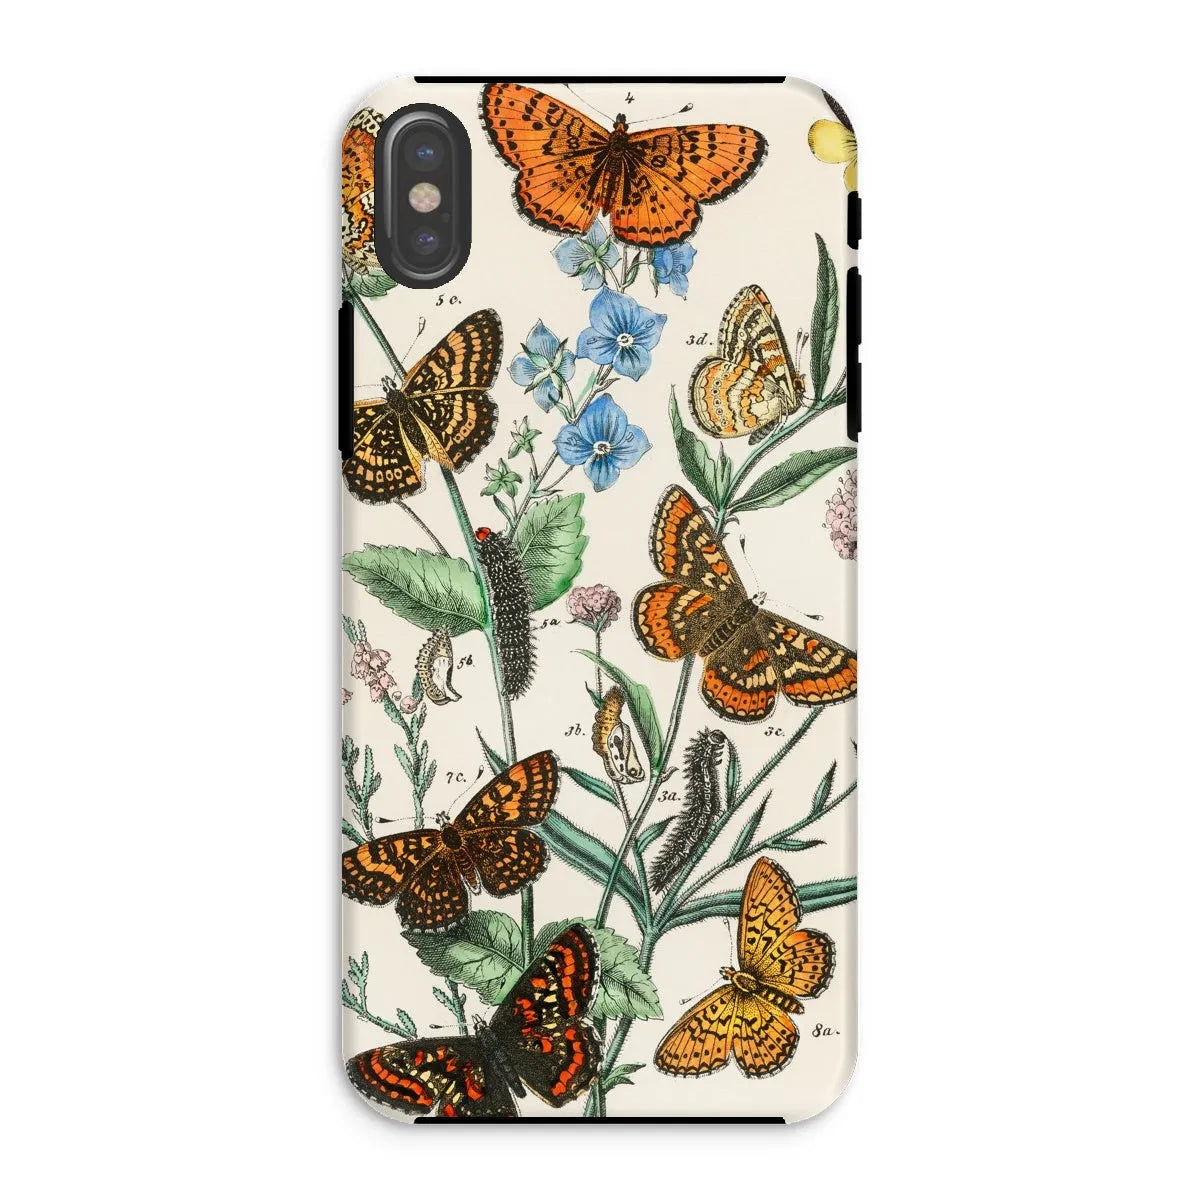 This Butterfly Aesthetic Art Phone Case - William Forsell Kirby - Iphone Xs / Matte - Mobile Phone Cases - Aesthetic Art